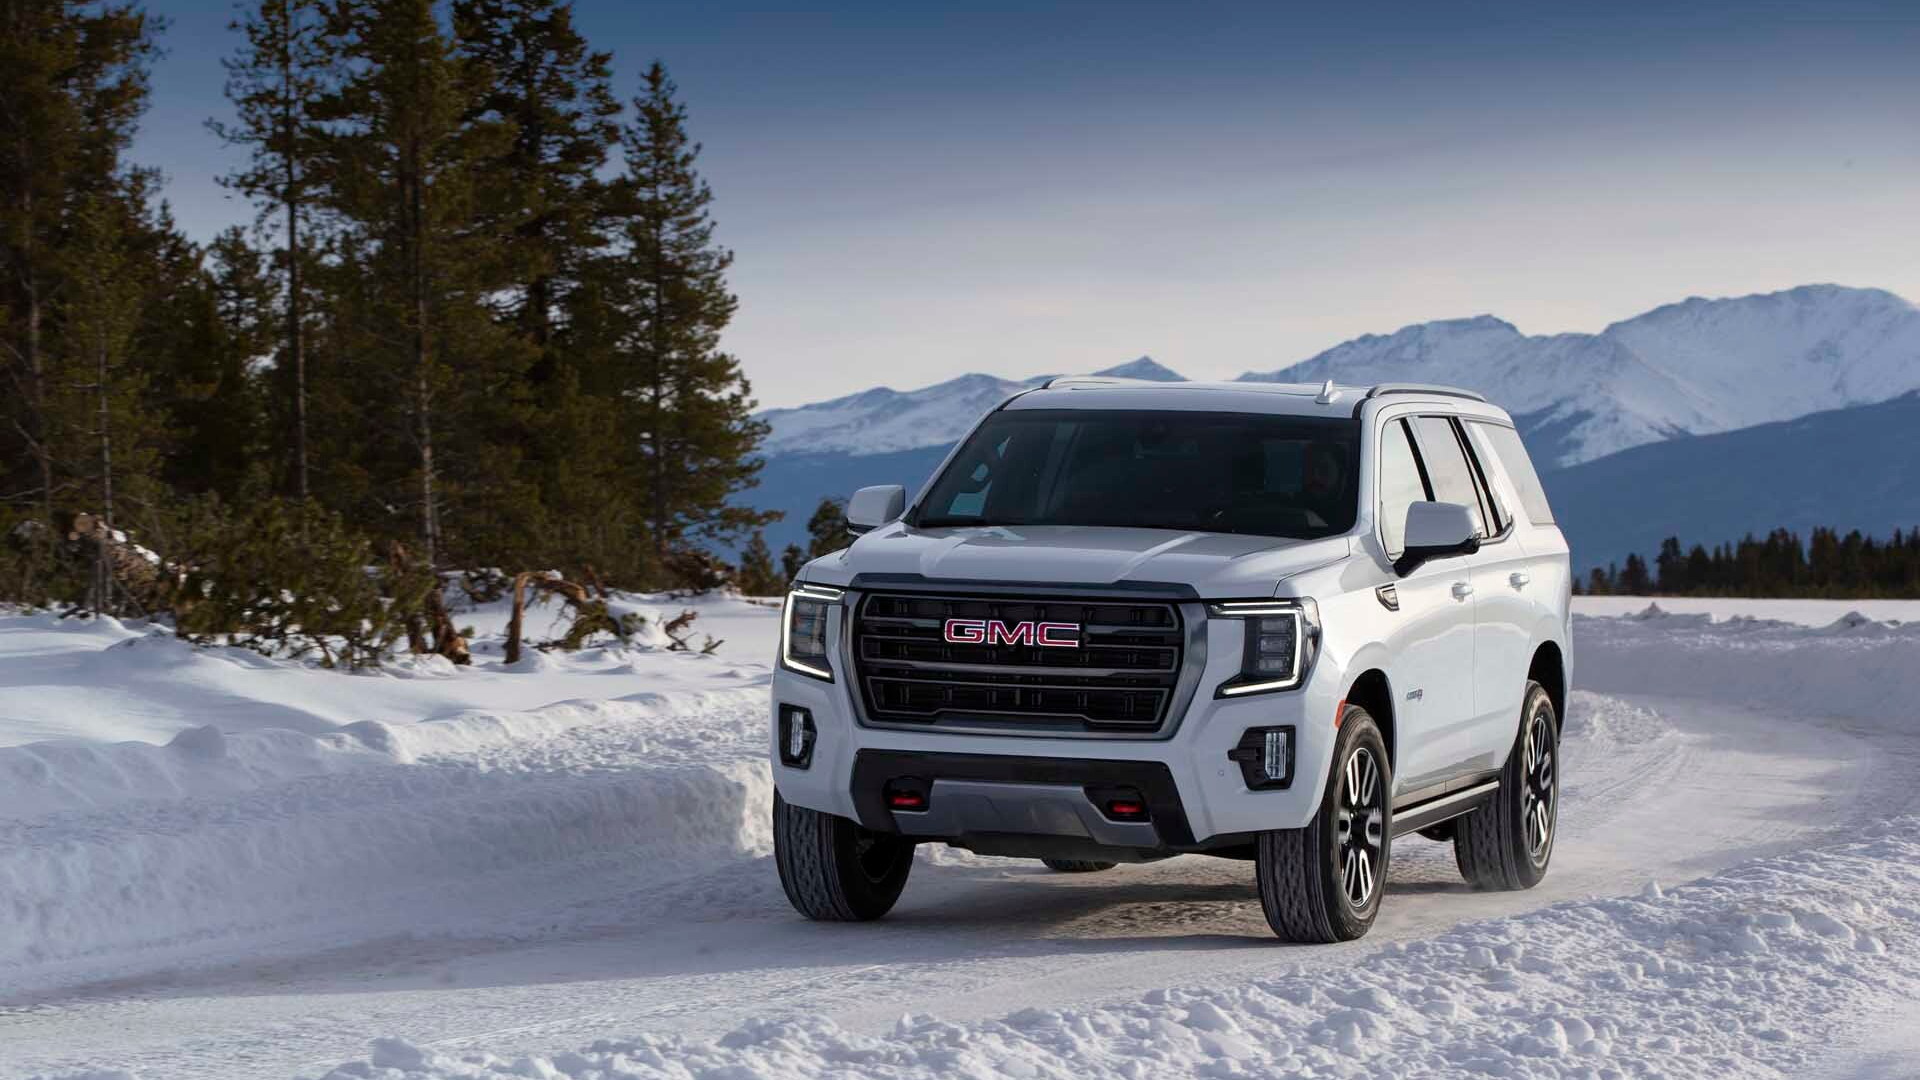 2021 GMC Yukon SUV revealed Richer Denali, tougher AT4, and more space